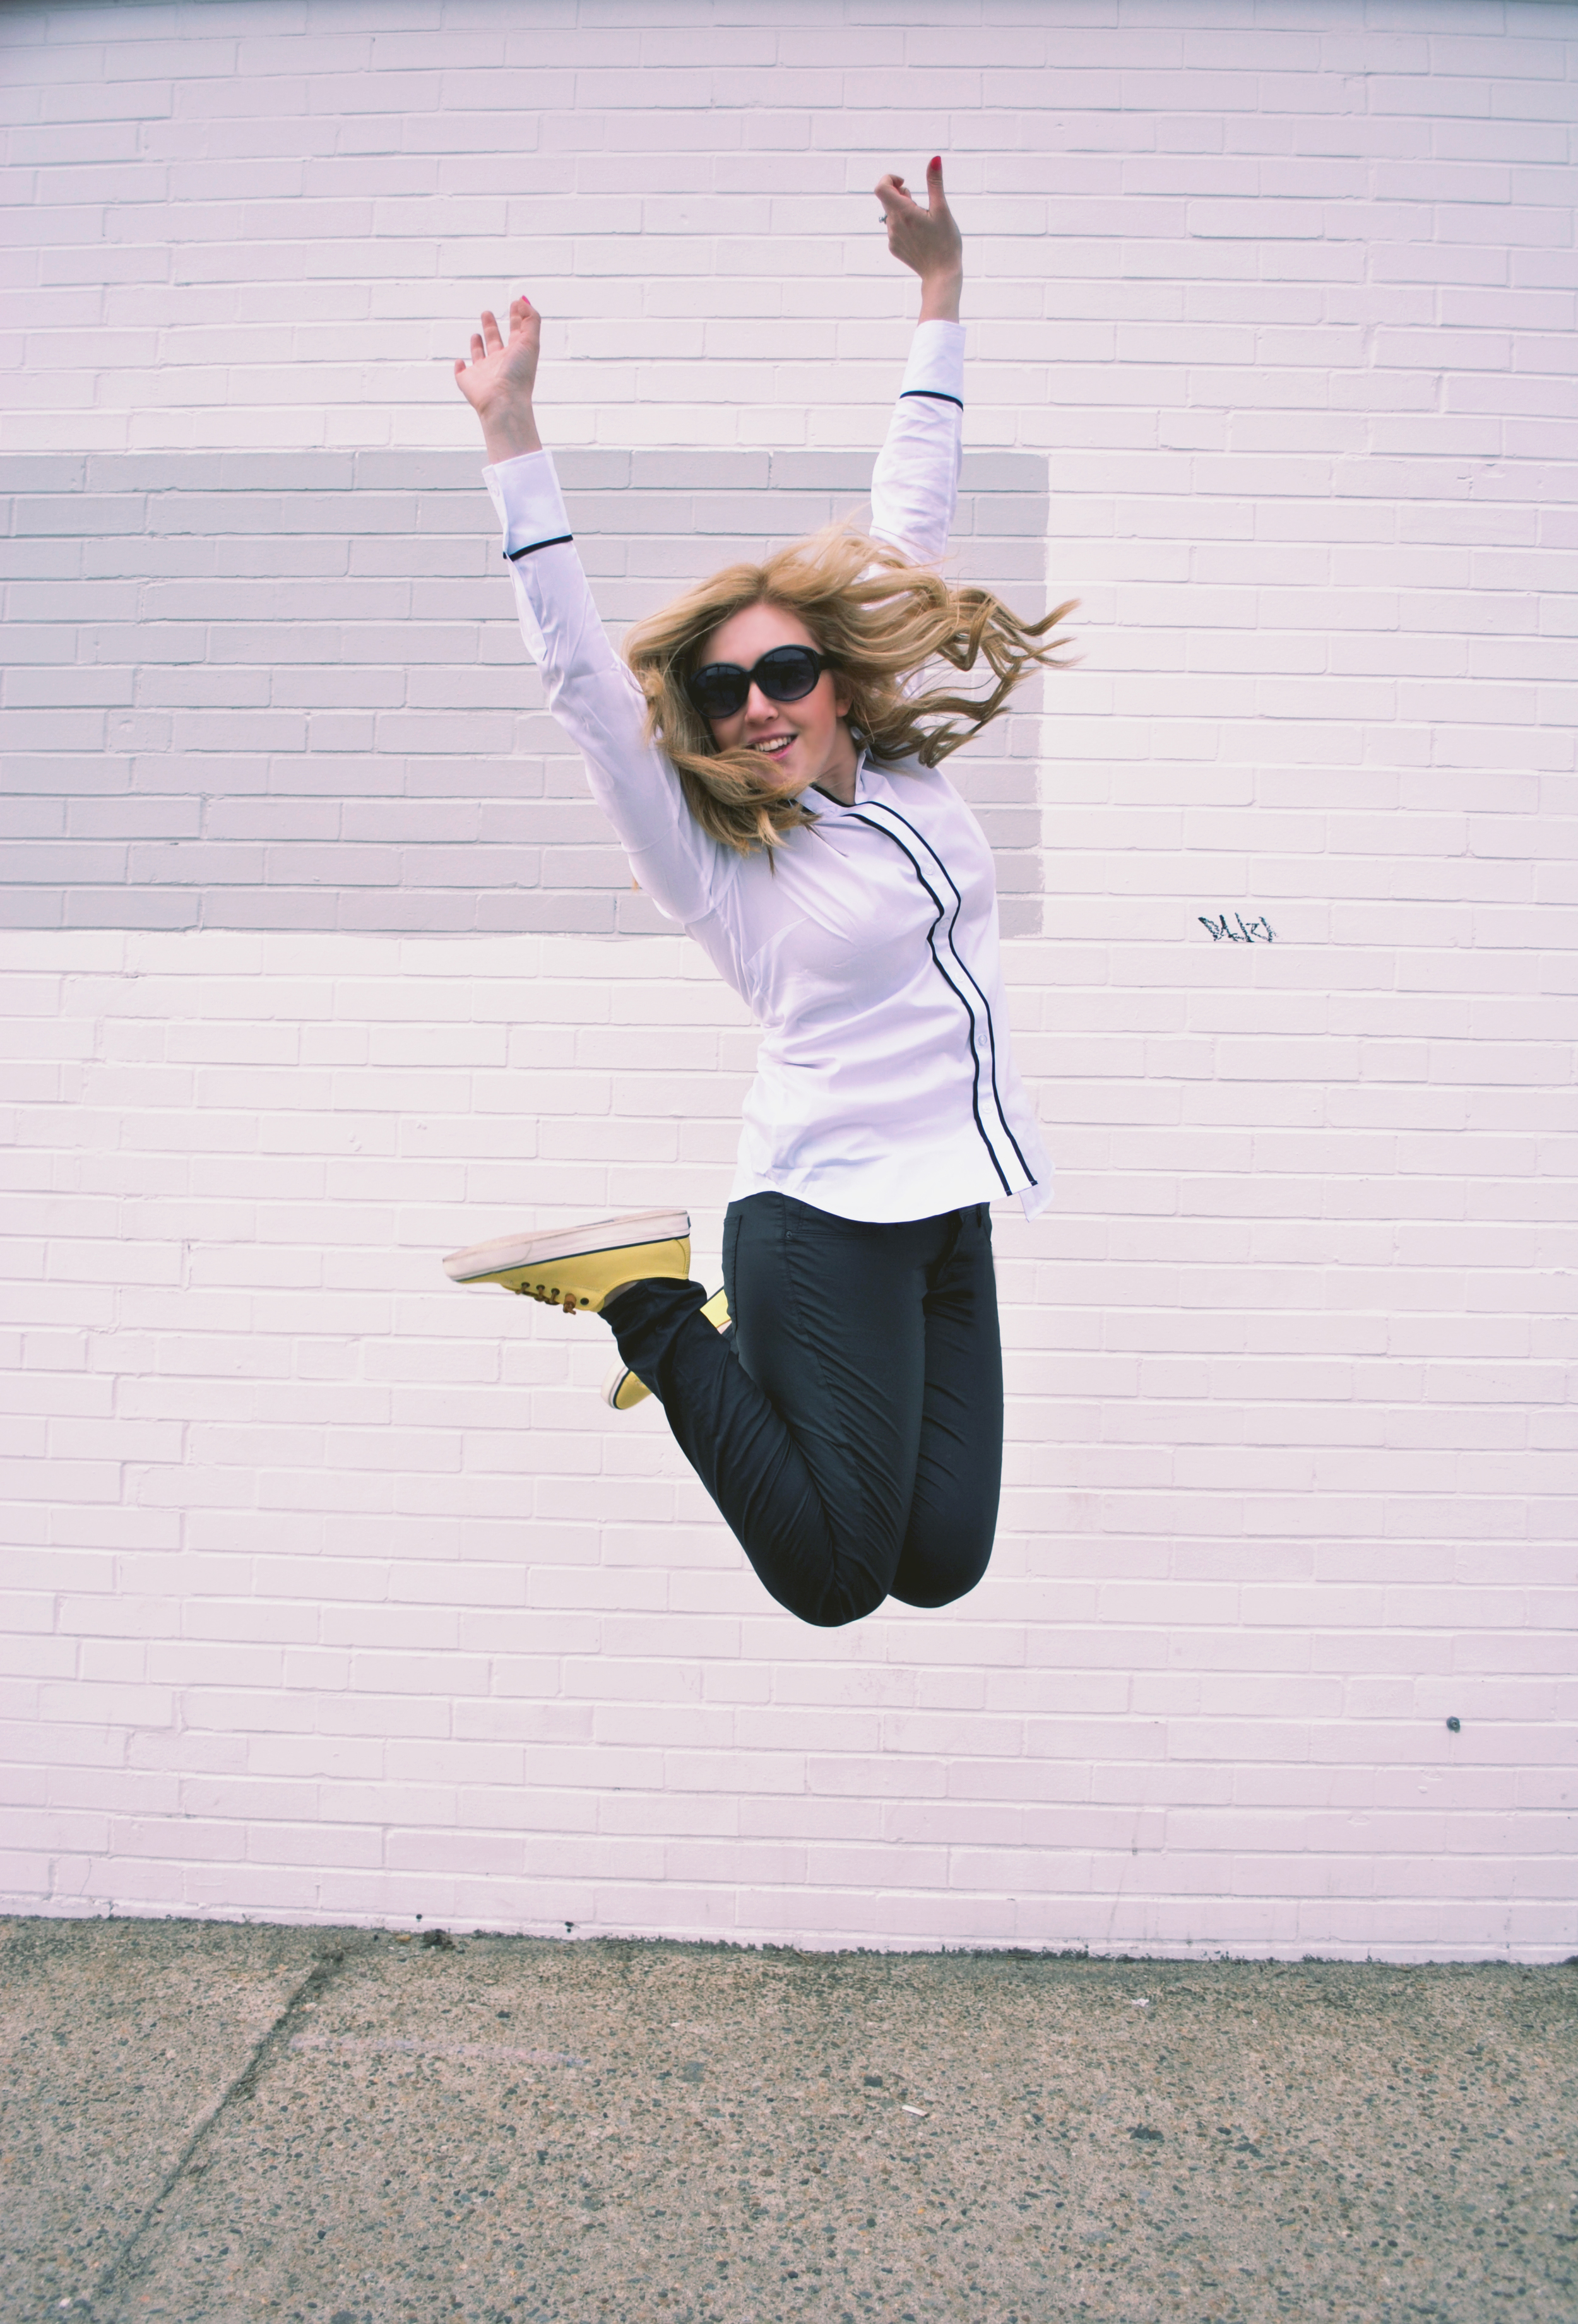 jumping for joy | thoughtfulwish // leather pants // ann taylor // white shirt // leather jacket // yellow sperrys